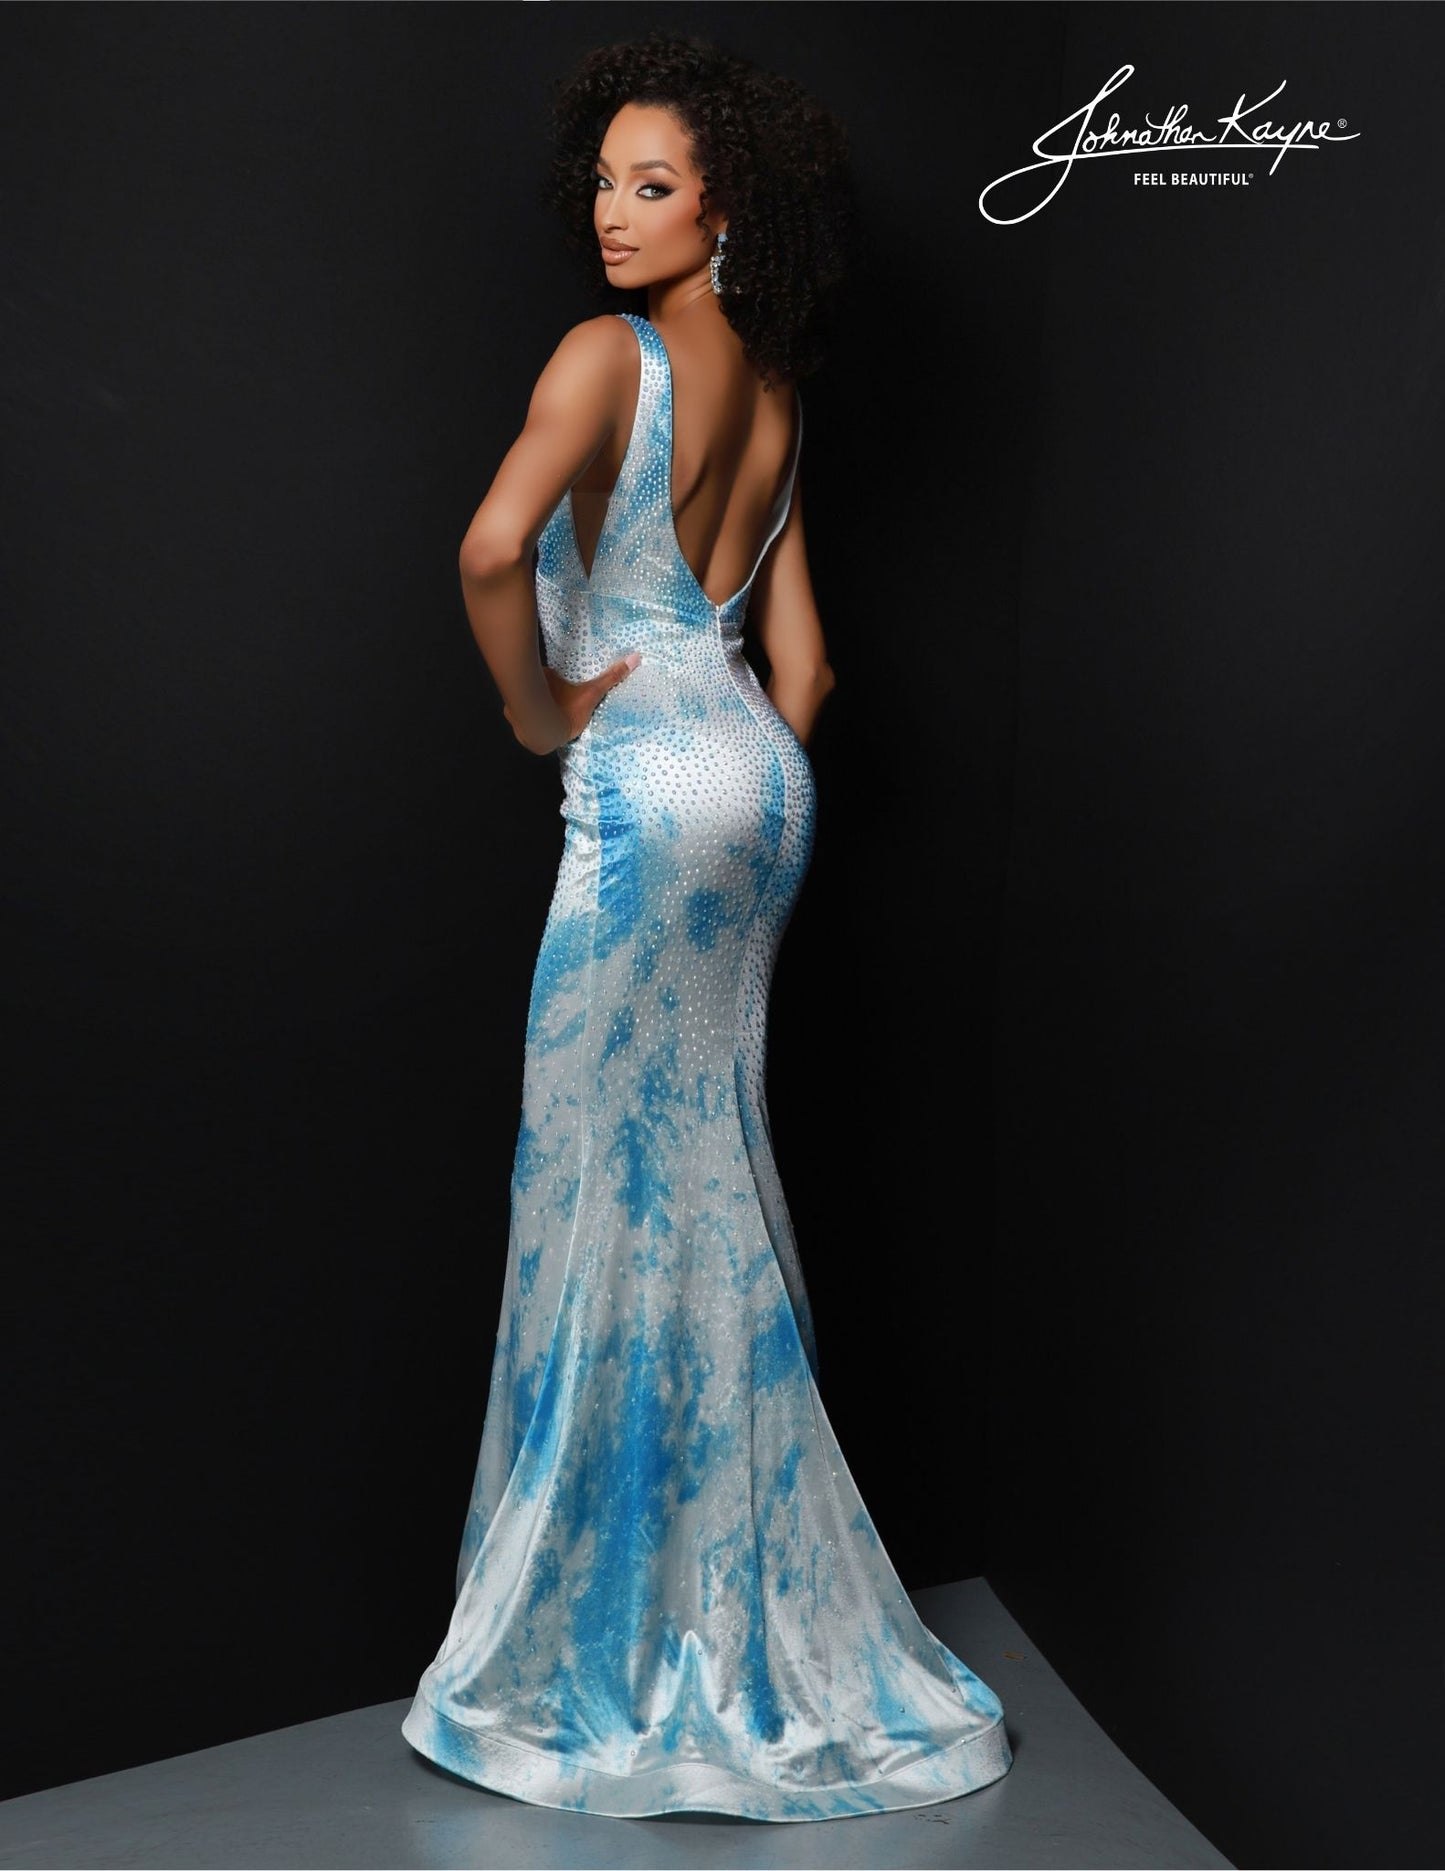 Johnathan Kayne 2831 is a long, formal mermaid gown perfect for all your special occasions. This elegant V Neck design is adorned with gorgeous sequins for a sparkling look and is sure to make you feel like the belle of the ball. Show off your curves with this stunningly beautiful dress for an unforgettable night! Get ready to steal the show in our best-selling silhouette, now adorned in a printed shiny Lycra gown. This piece promises to illuminate every room you enter.